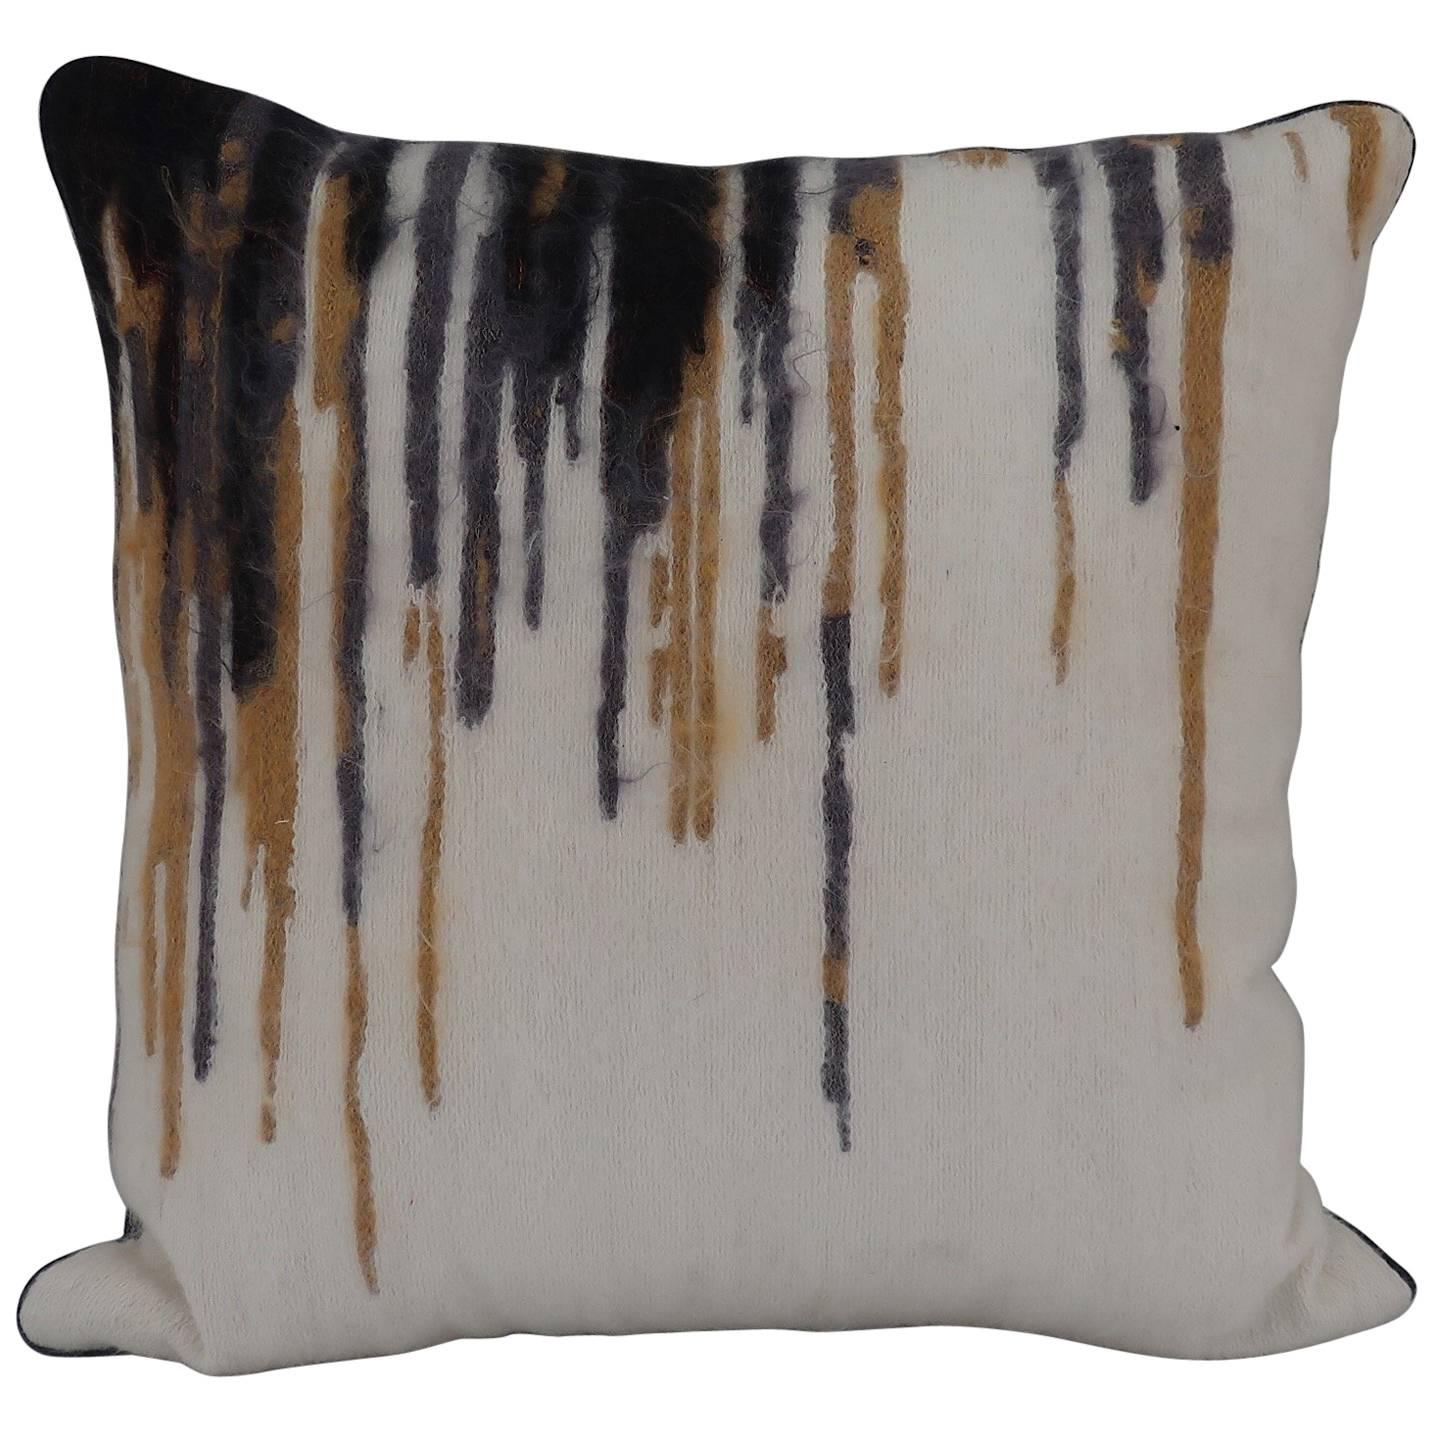 Handcrafted Embroidered Pillow  White Black Gold and Grey Metallic Highlights For Sale